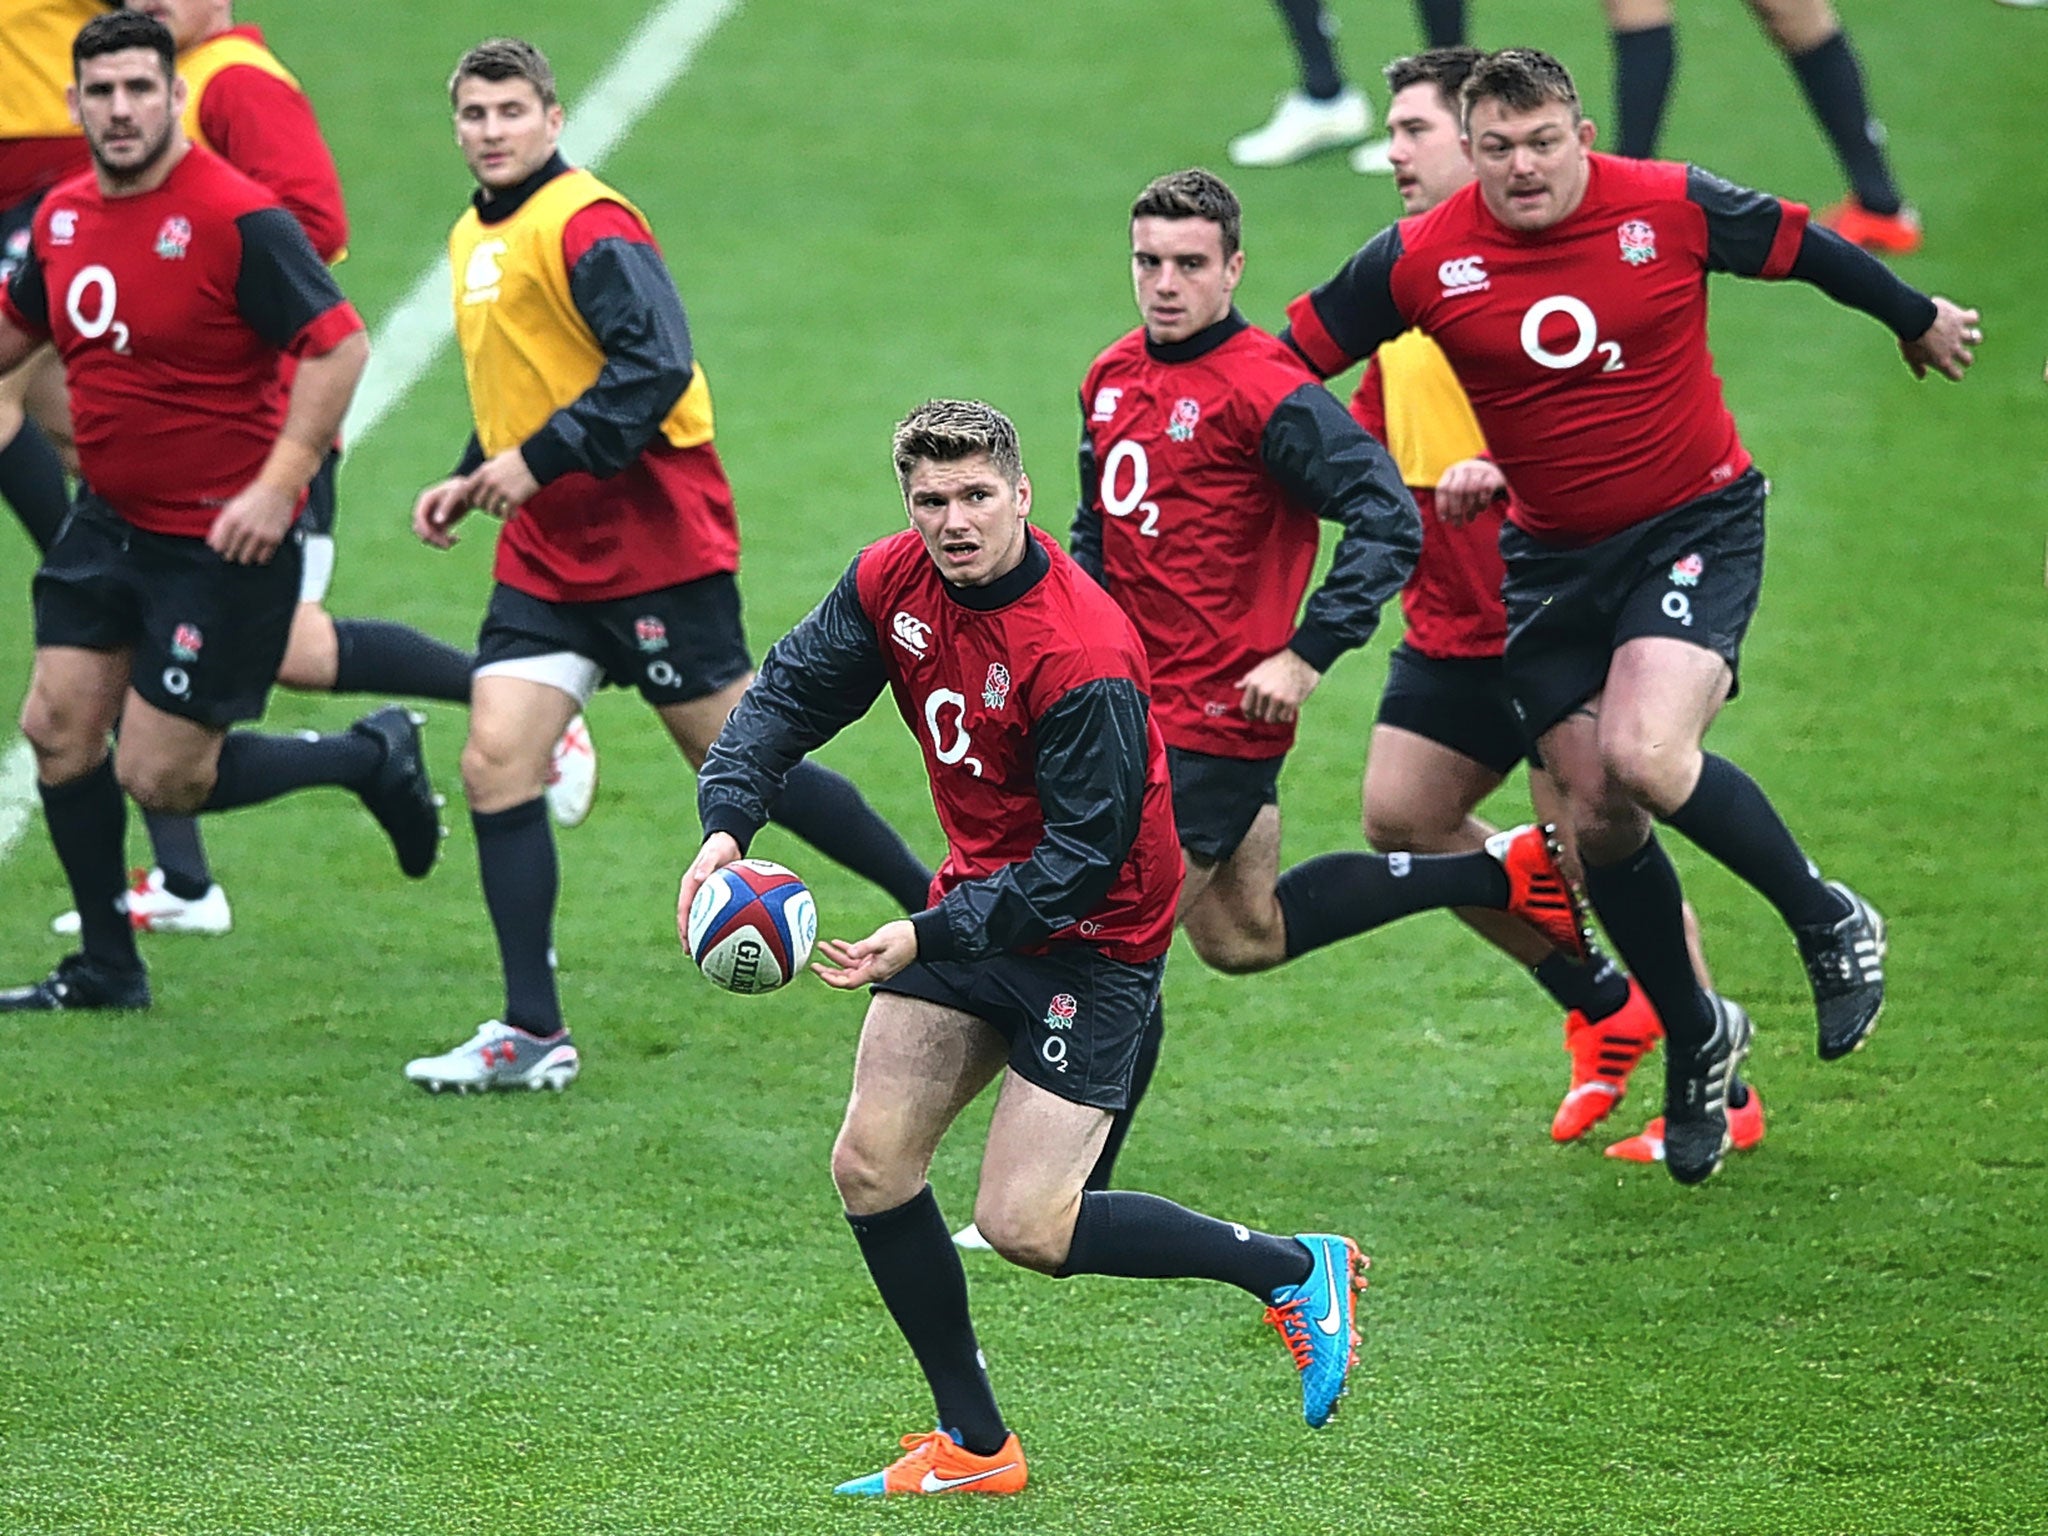 Owen Farrell in action during the England captain’s run at Twickenham on Friday